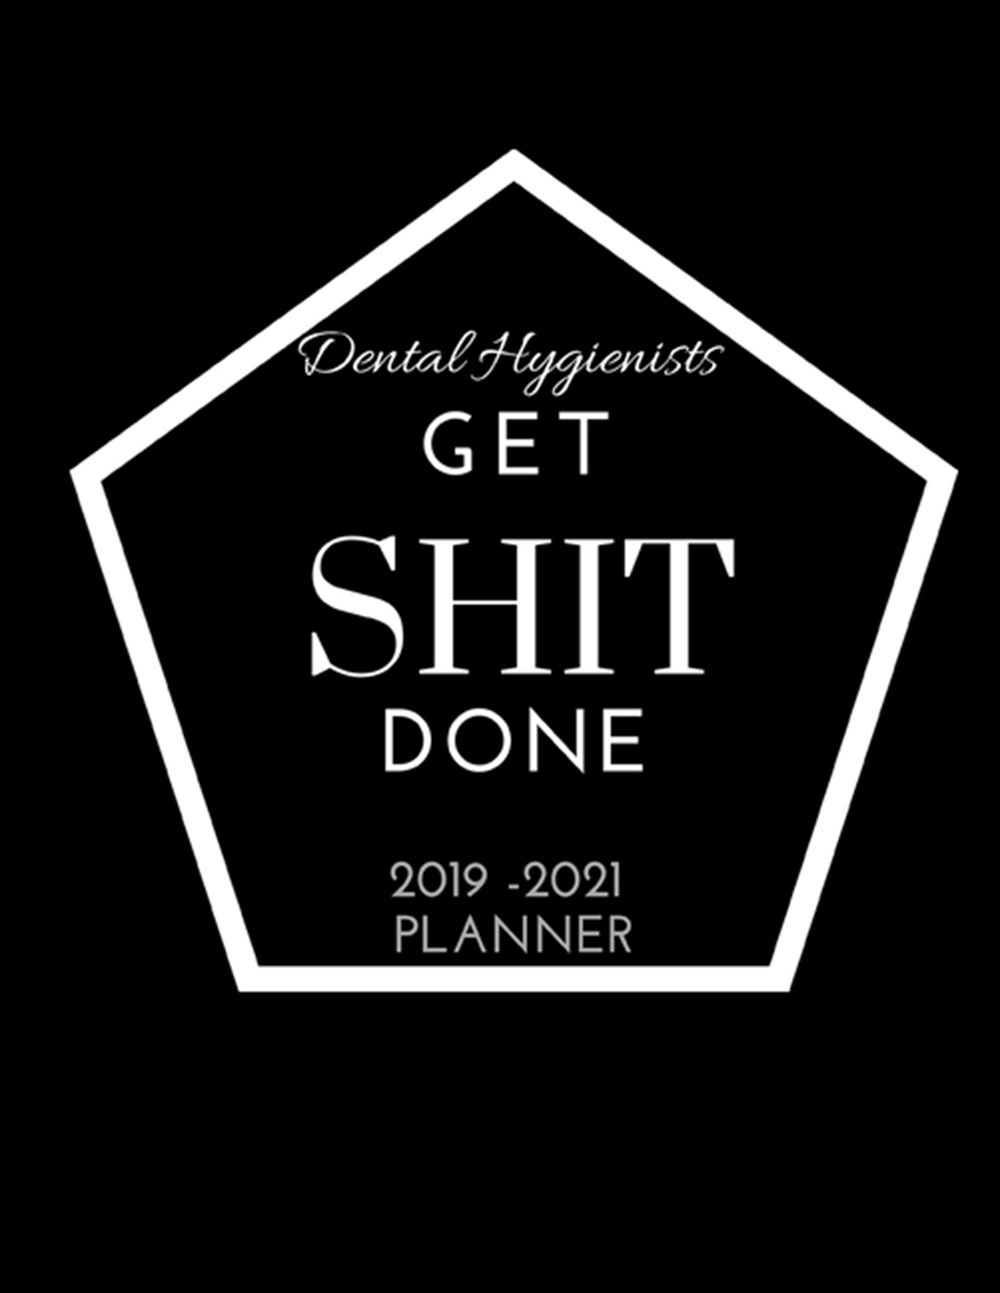 Dental Hygienists Get SHIT Done 2019 - 2021 Planner 2 - 3 Year Organizer for Professionals: Family, 